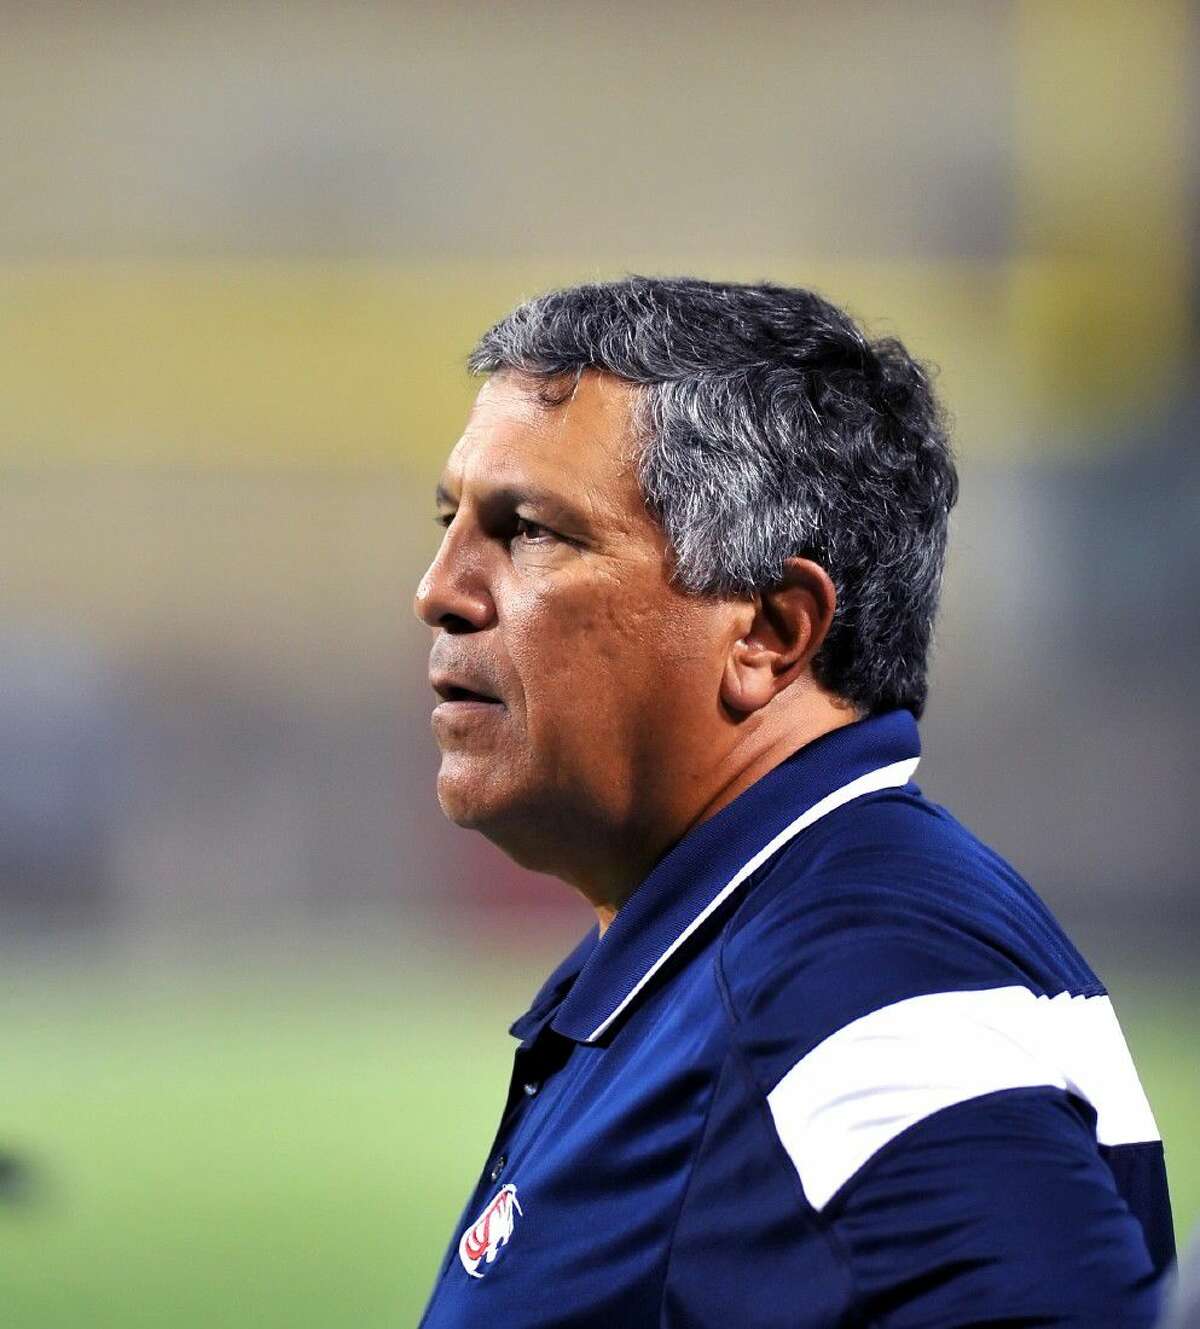 Cypress Springs head football coach Rick Cobia, the last coach hired by legendary Conroe coach Buddy Moorhead, will bring his Panthers to town Thursday night to face the Conroe Tigers.